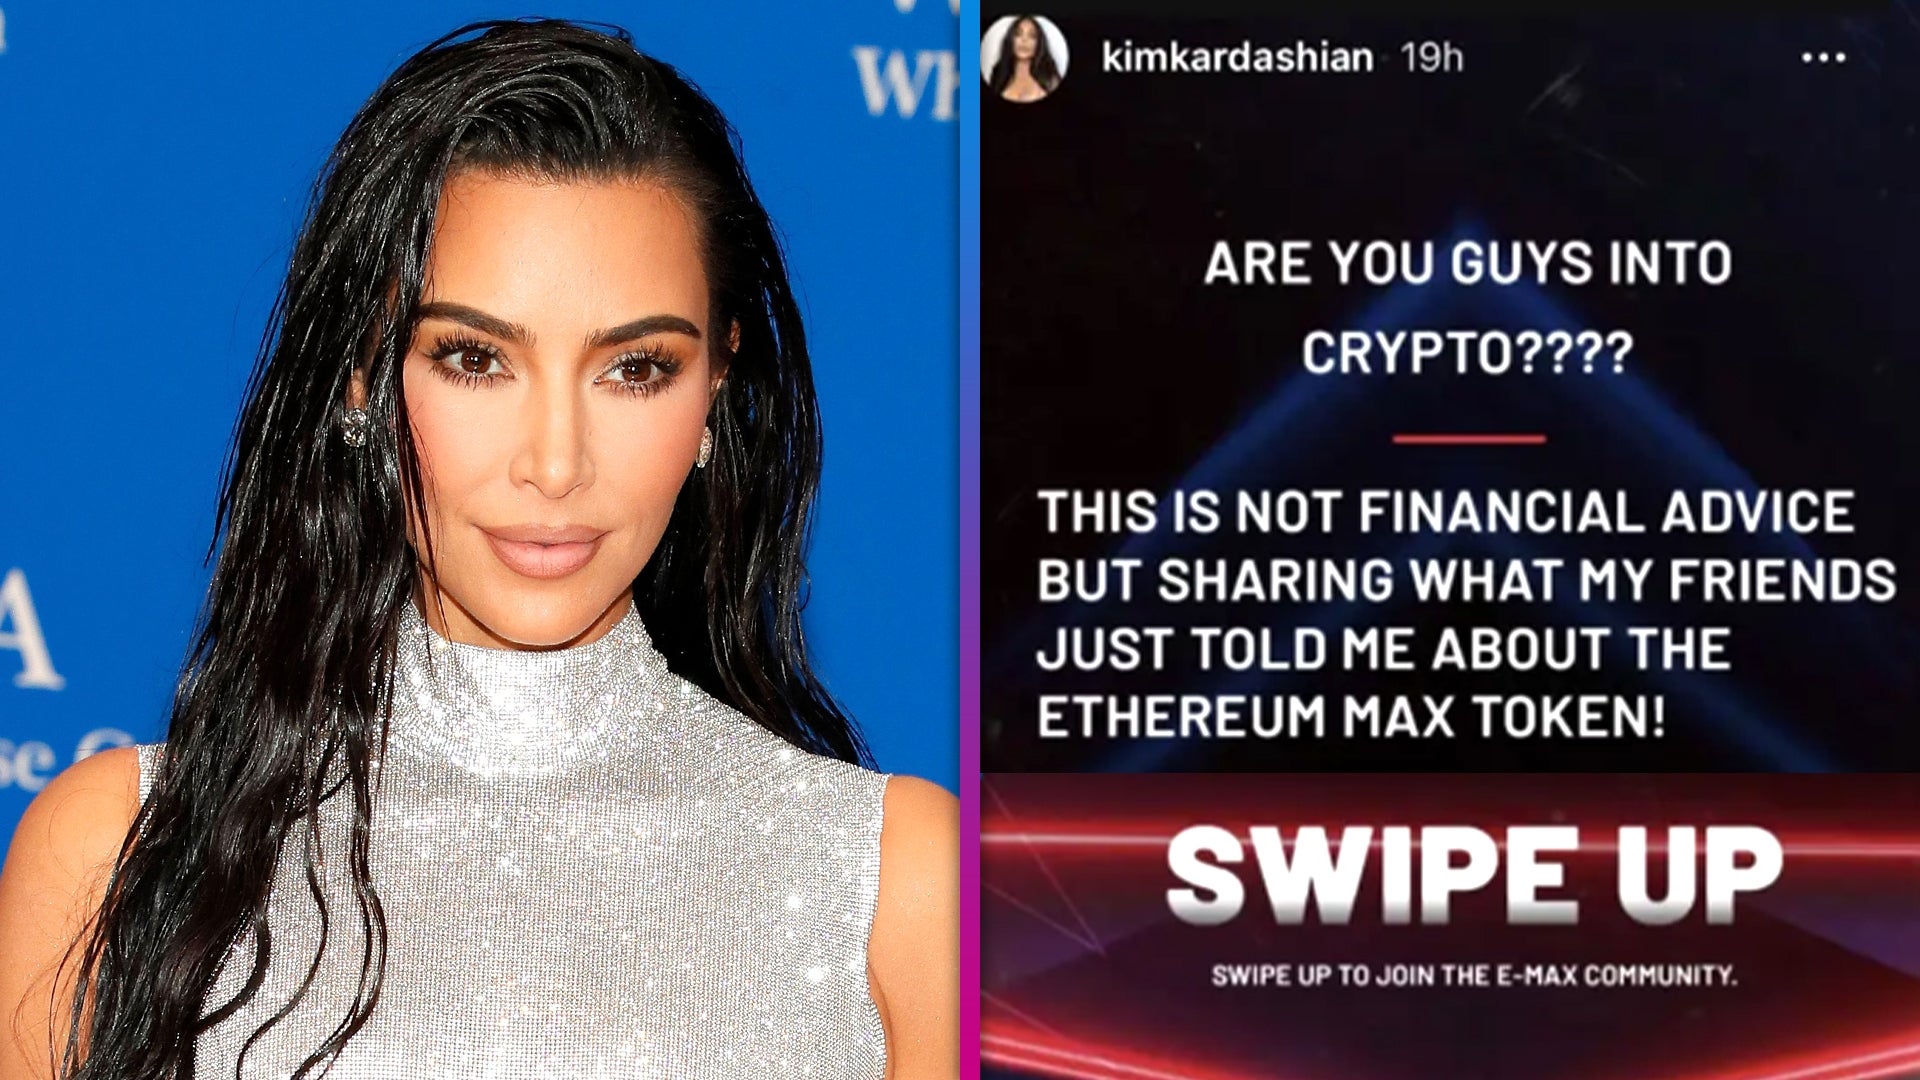 Kim Kardashian Fined Over a Million Dollars for ‘Unlawfully Touting’ Cryptocurrency Charge